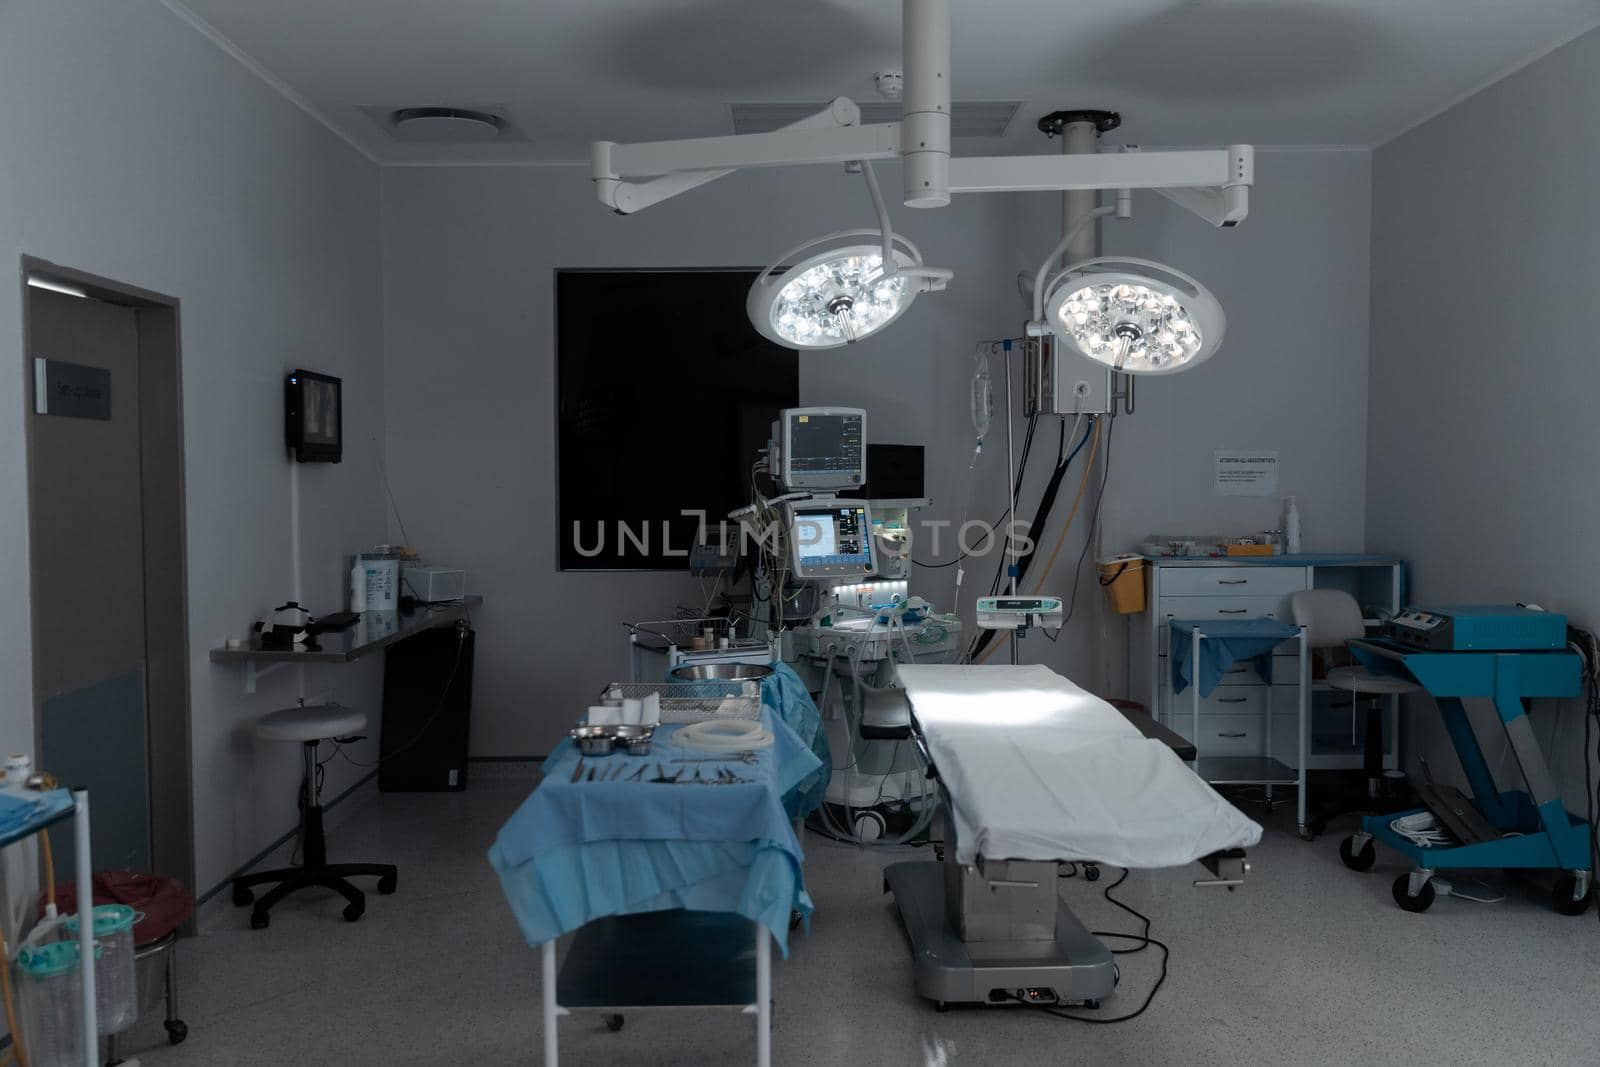 Surgical instruments, operating table, lights and equipment in modern hospital operating theatre by Wavebreakmedia